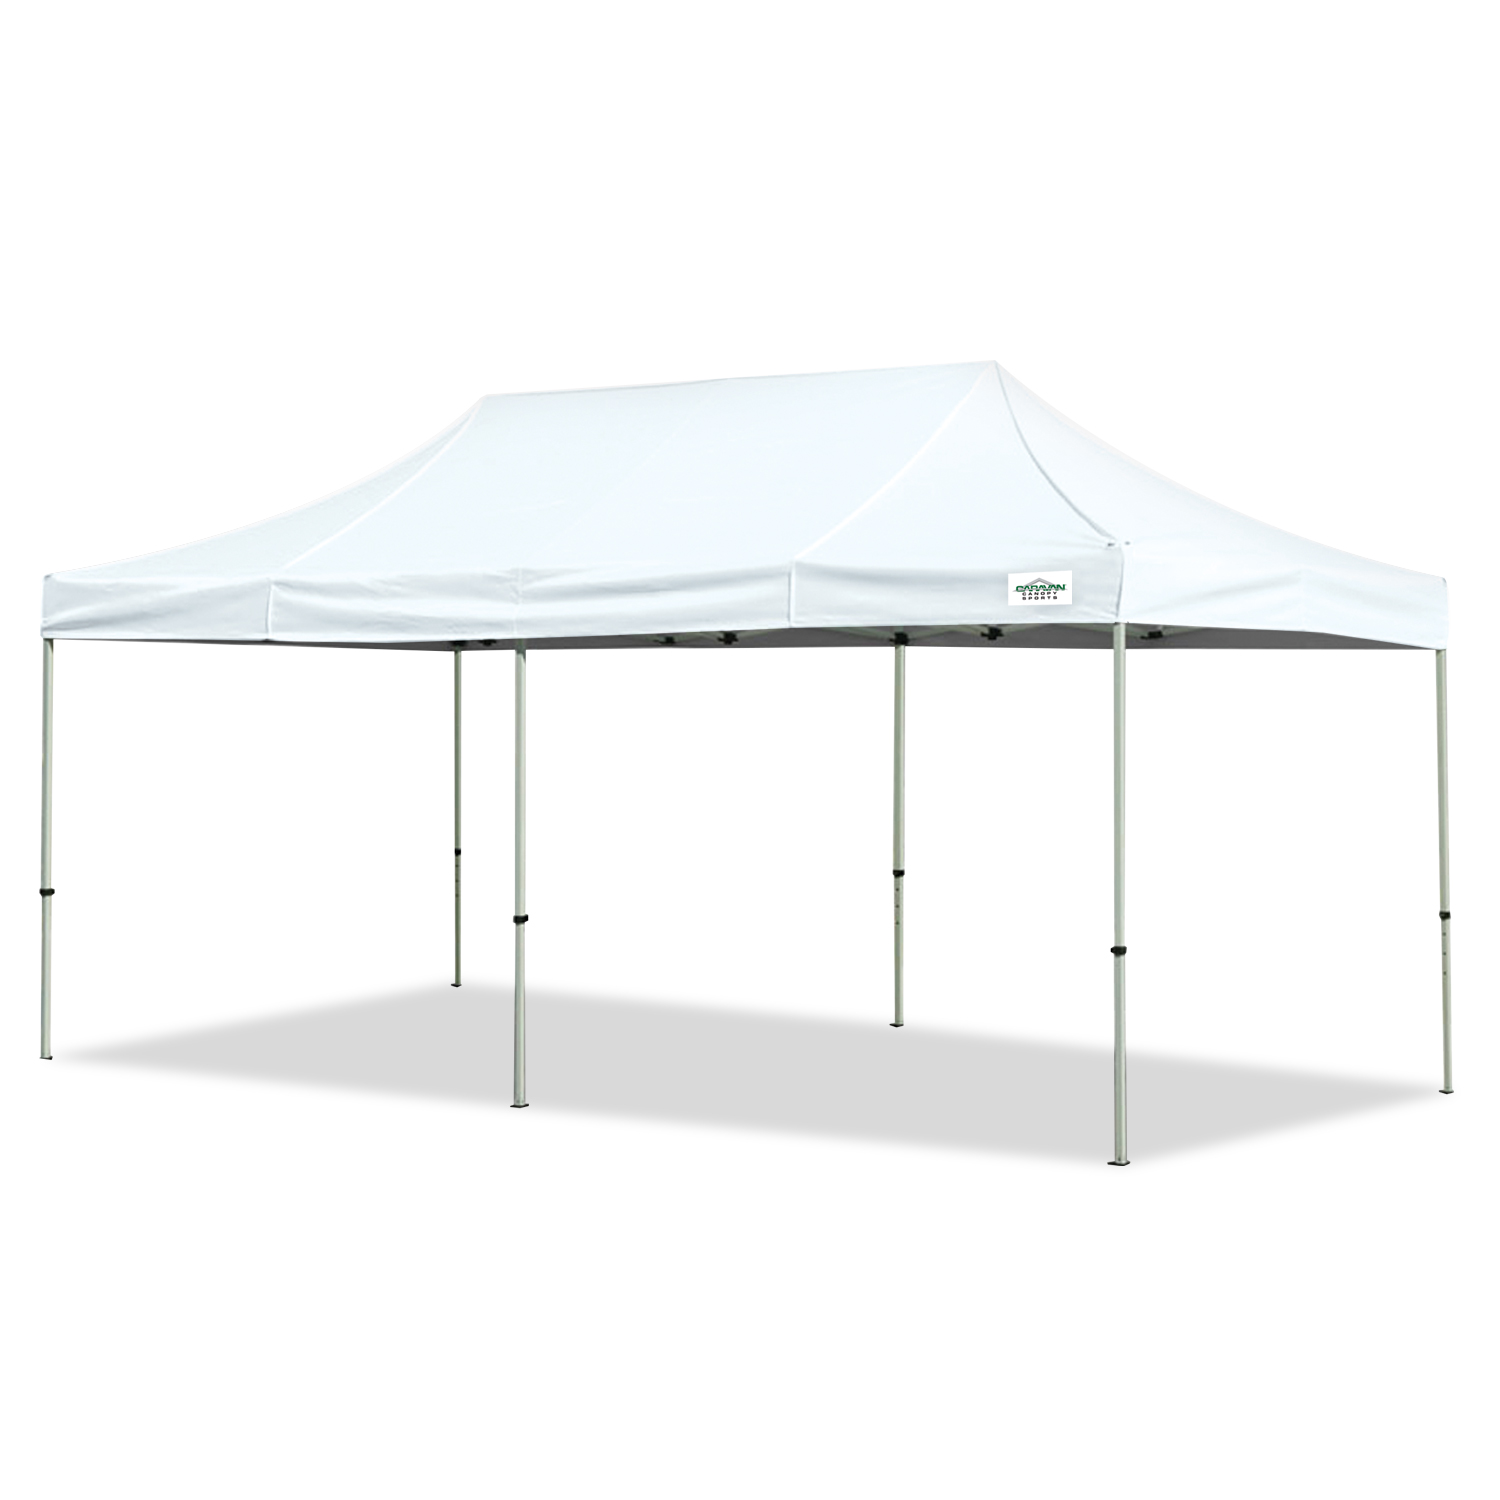 Vispronet White 10x20 Aluminum Carport Canopy Tent with 10x20 Full Walls, 10x10 Full Walls, Roller Bag, and Stake Kit - 2